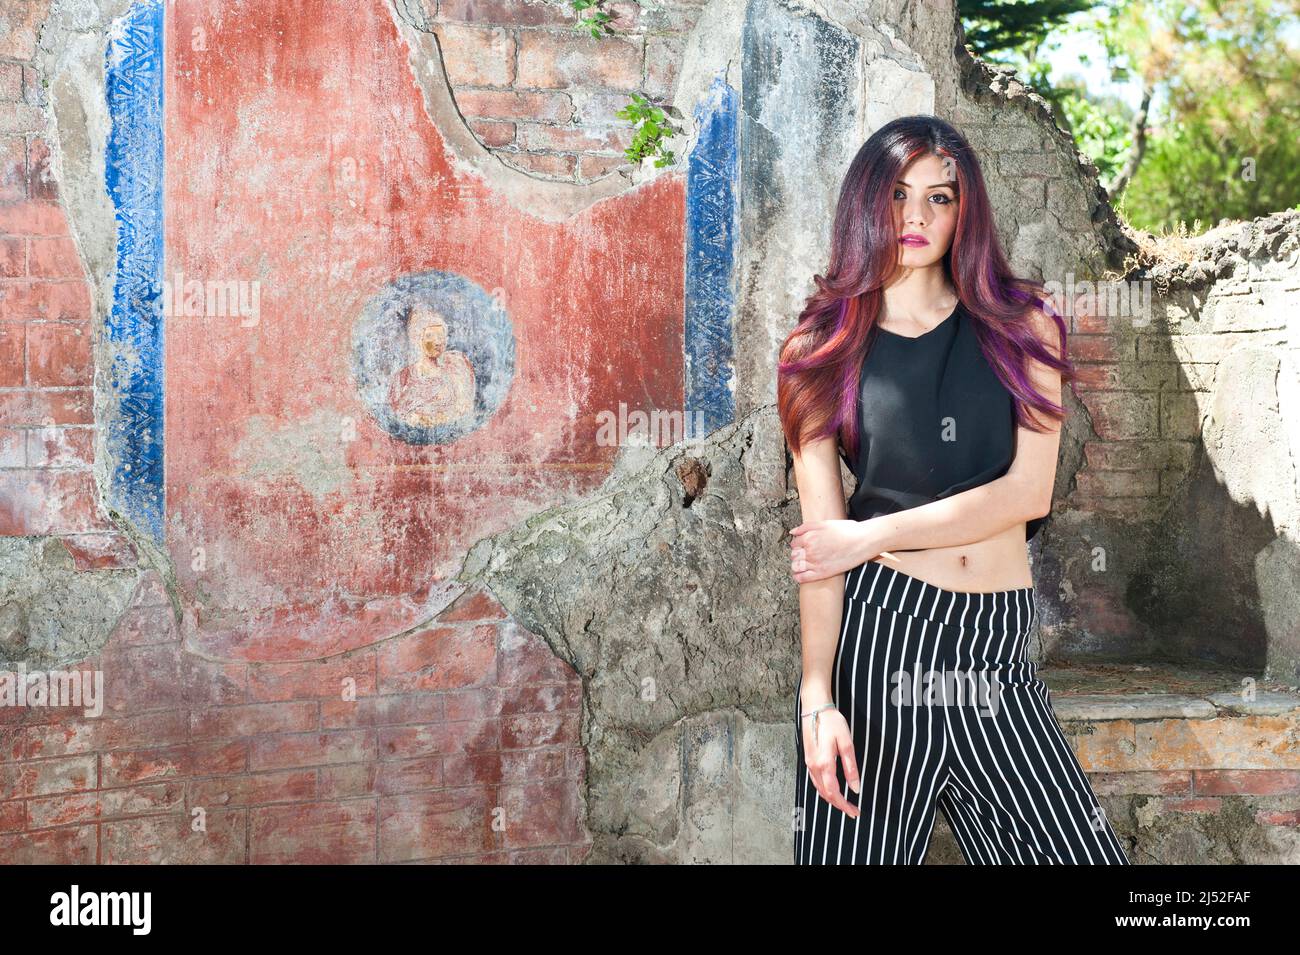 Red hair model in front of ancient roman mosaic Stock Photo